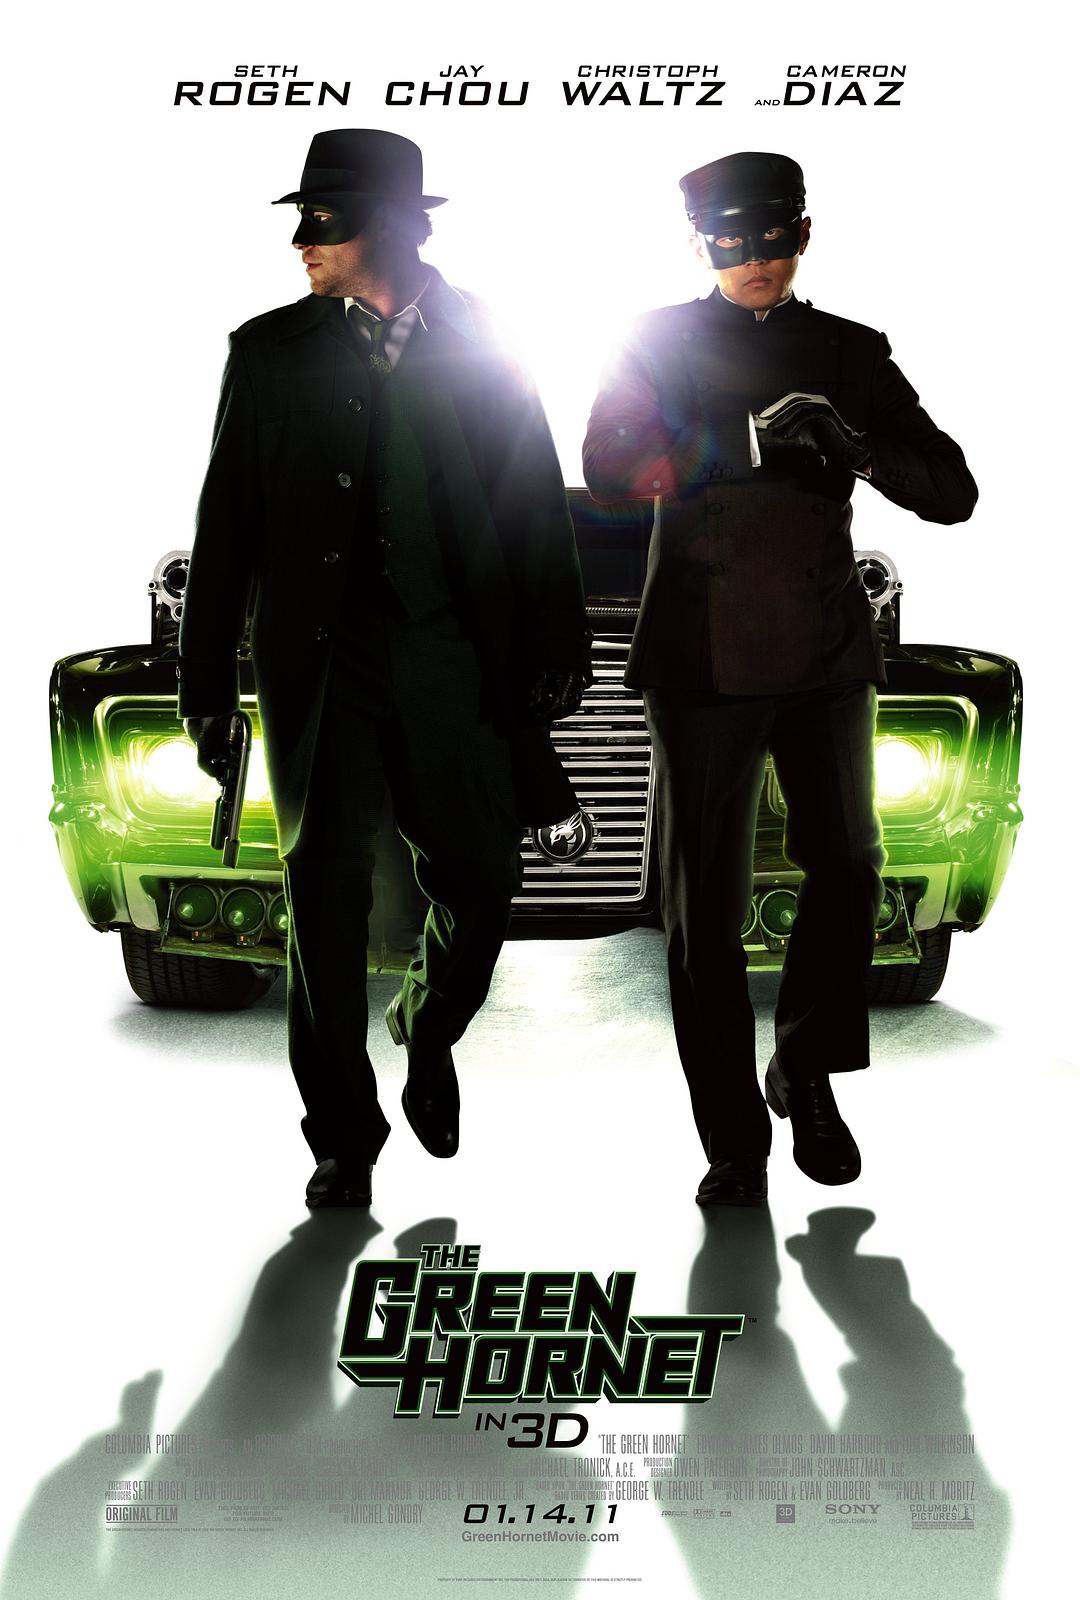  The.Green.Hornet.2011.1080p.BluRay.x264-CROSSBOW 7.95GB-1.png